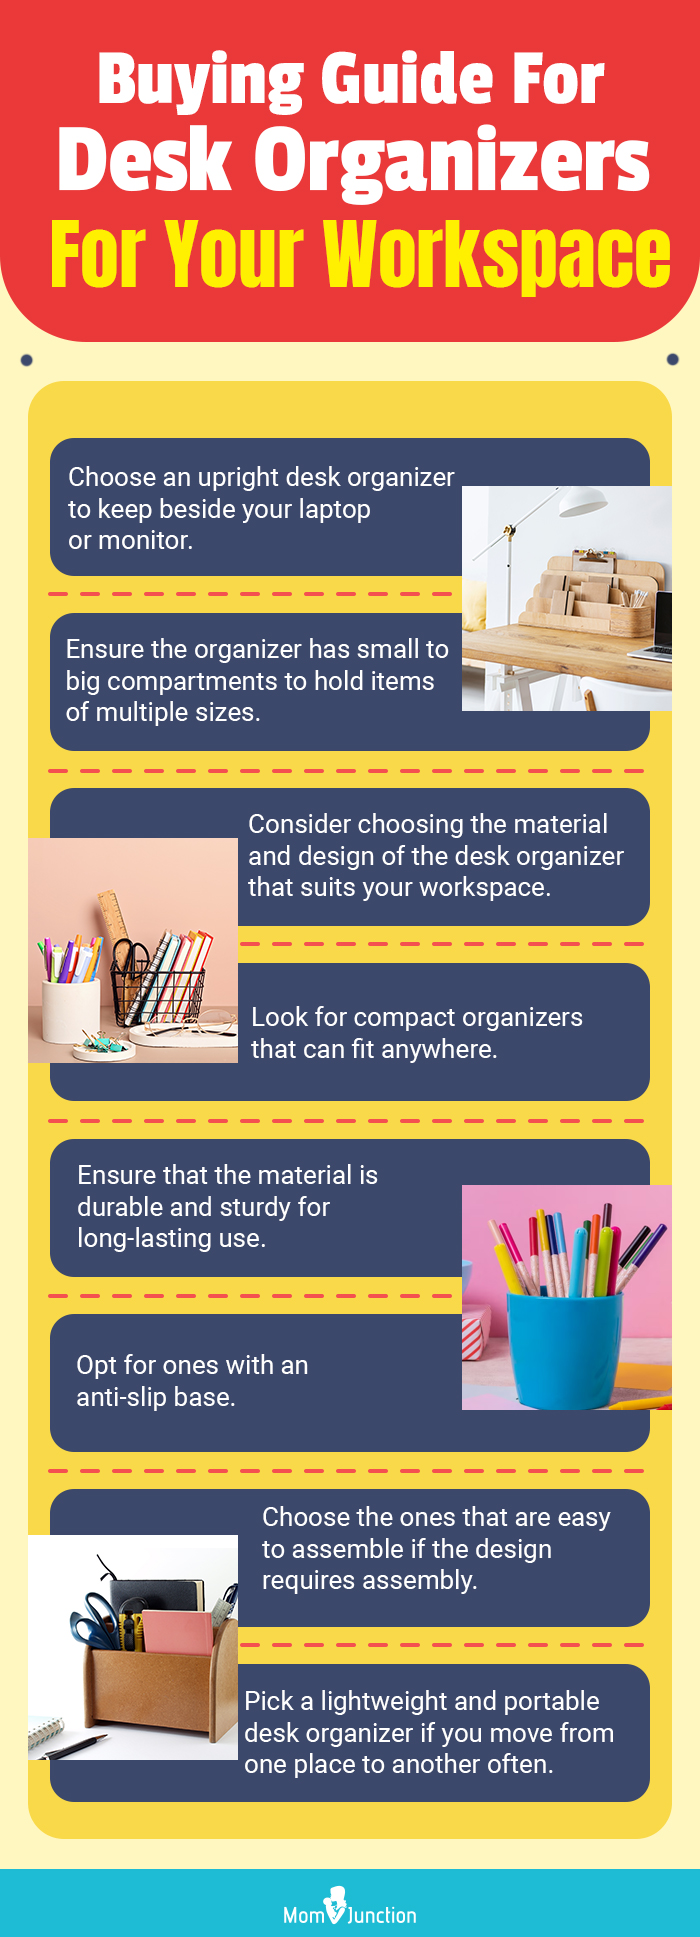 Buying Guide For Desk Organizers For Your Workspace (infographic)